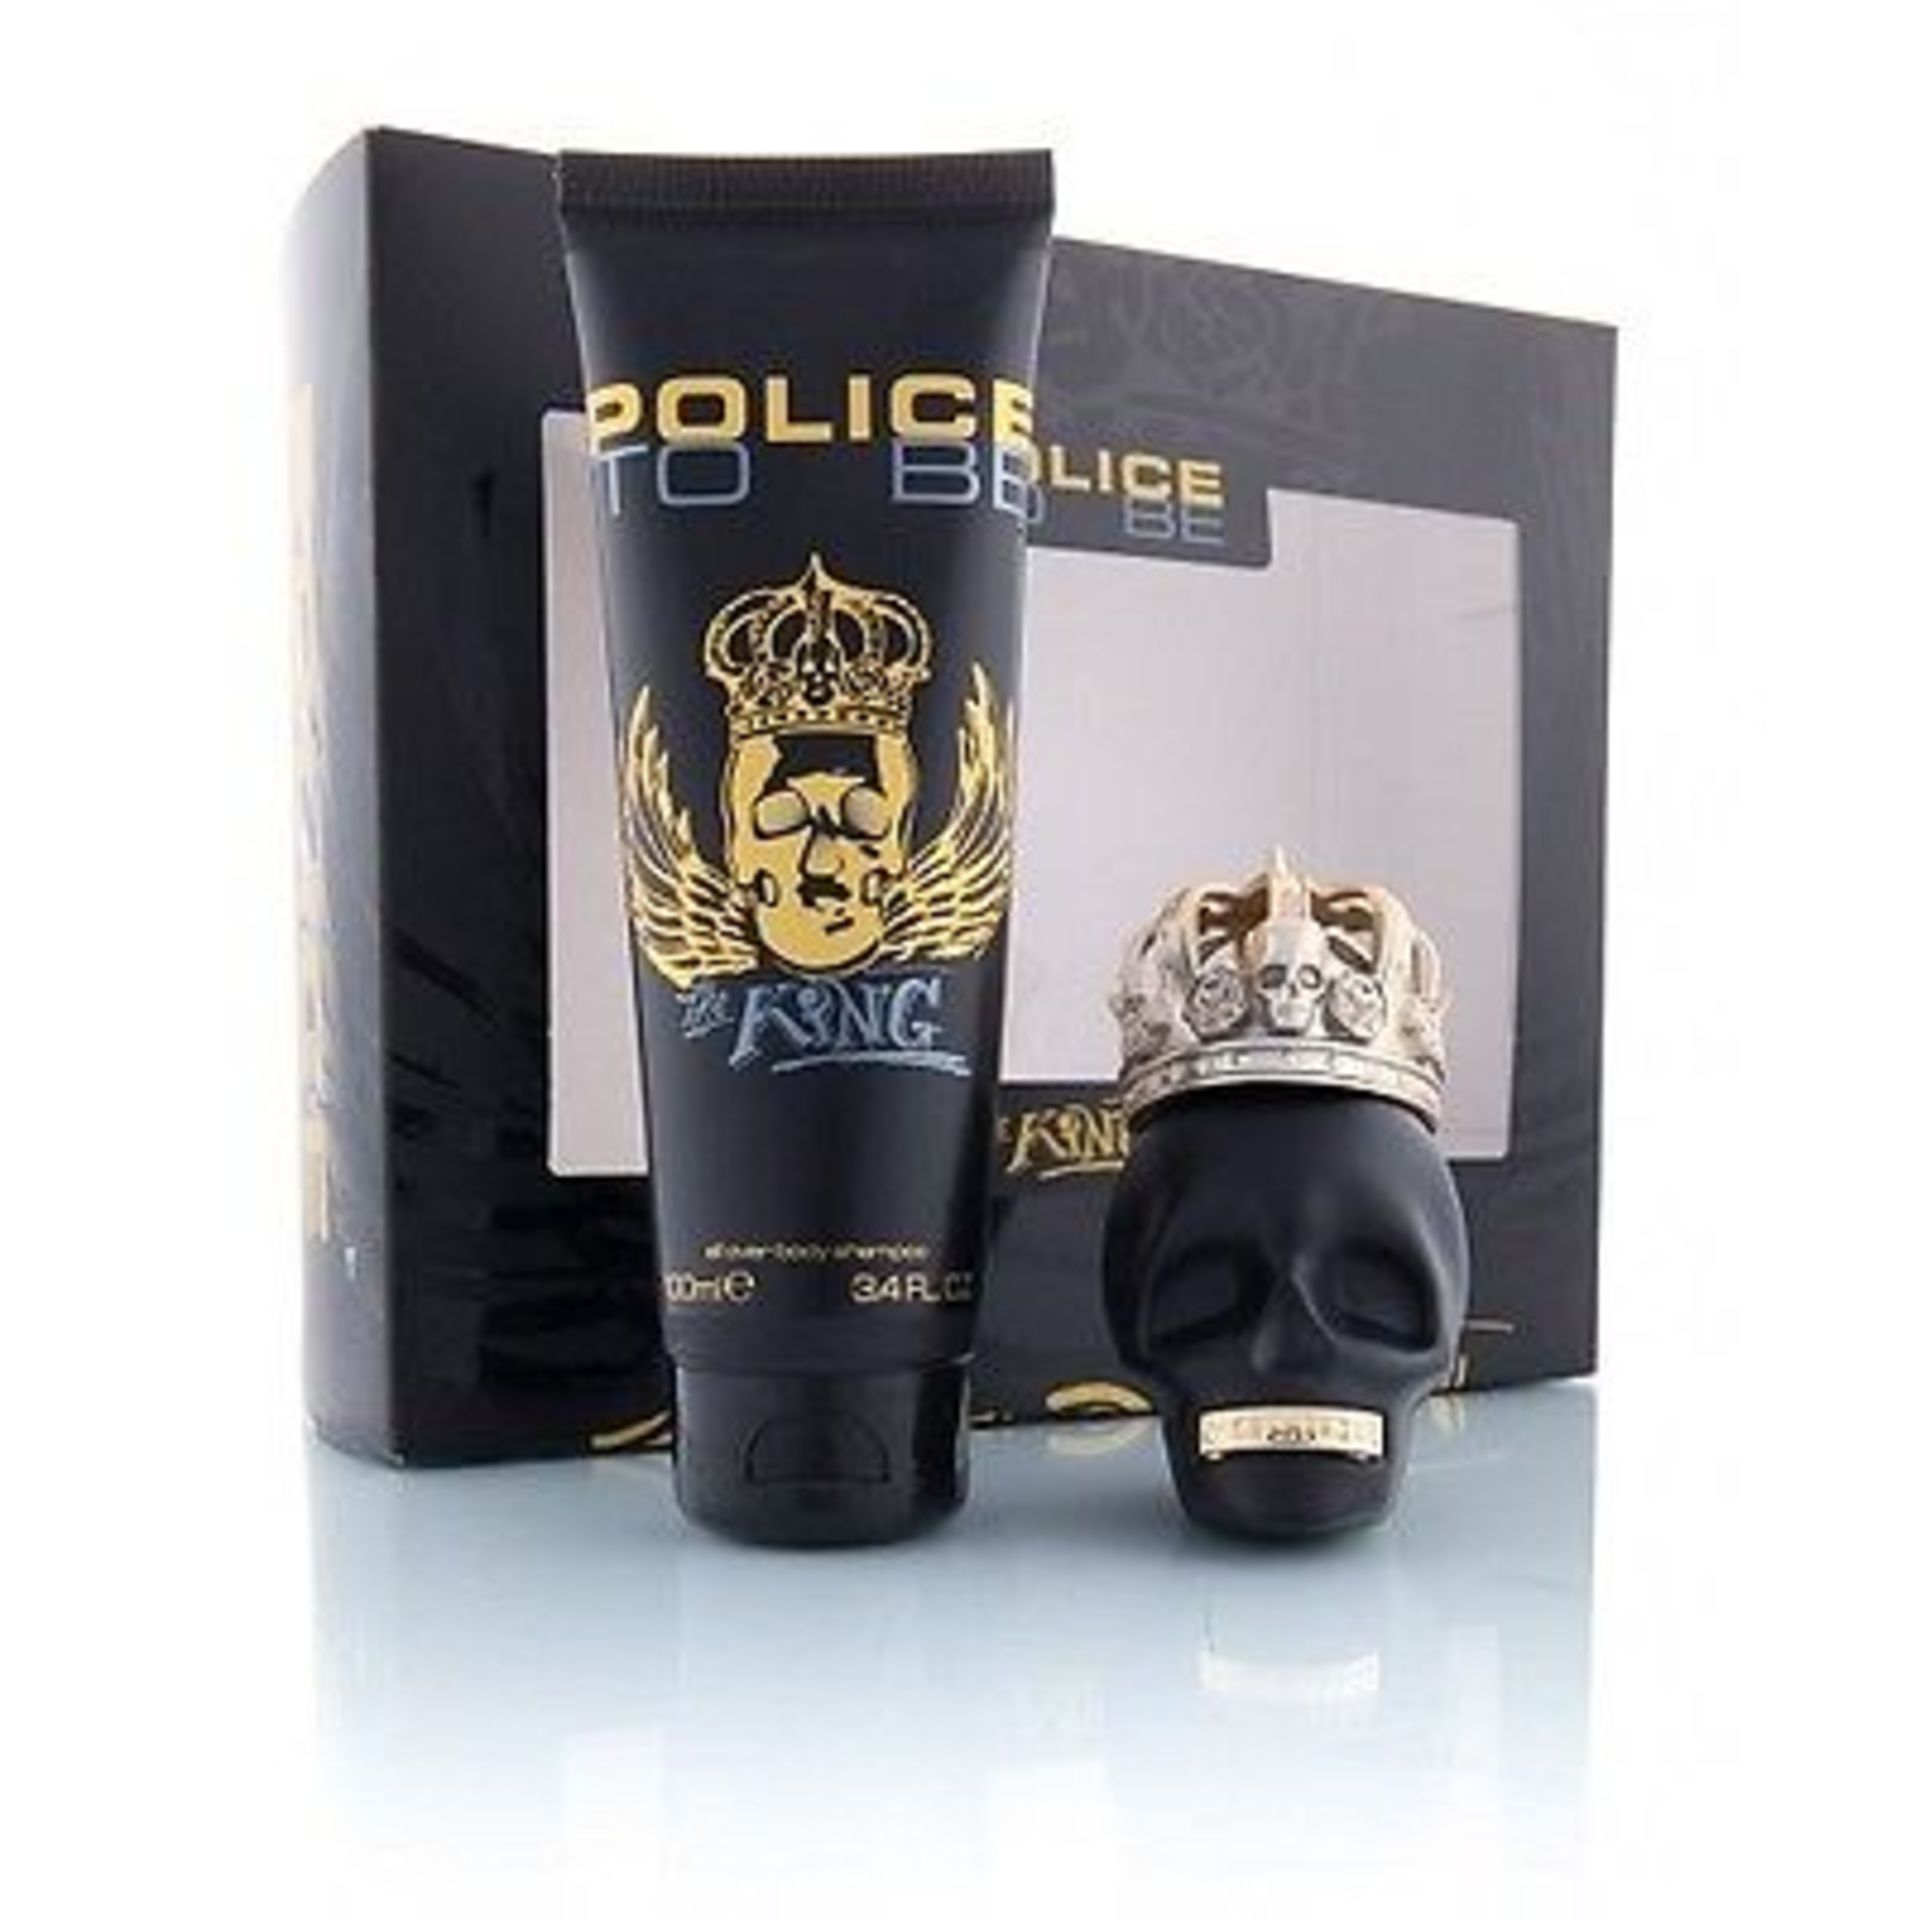 V Brand New Police To Be The King EDT And All Over Body Shampoo For Men RRP19.50 X 2 Bid price to be